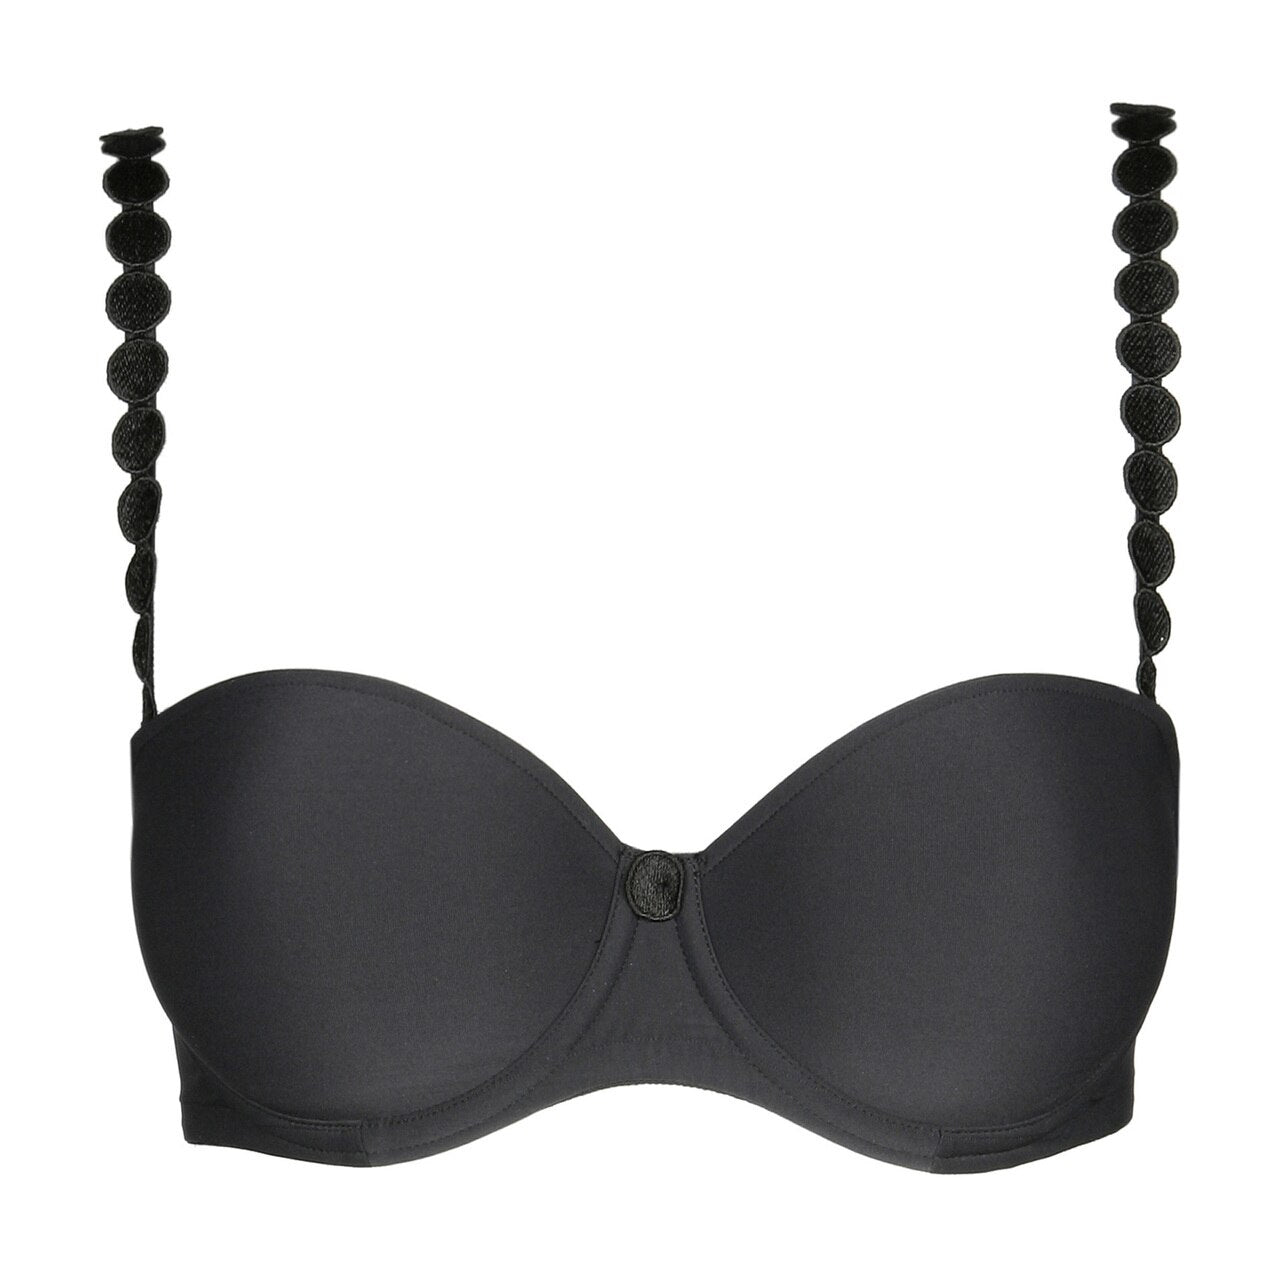 Midnightdivas - The Ultimate Strapless Bra <3 Say good riddance to heavy,  irritating strapless bras, and hello to our lightweight, Up for Anything  Ultimate Strapless Bra! Thanks to our innovative Smart Grip